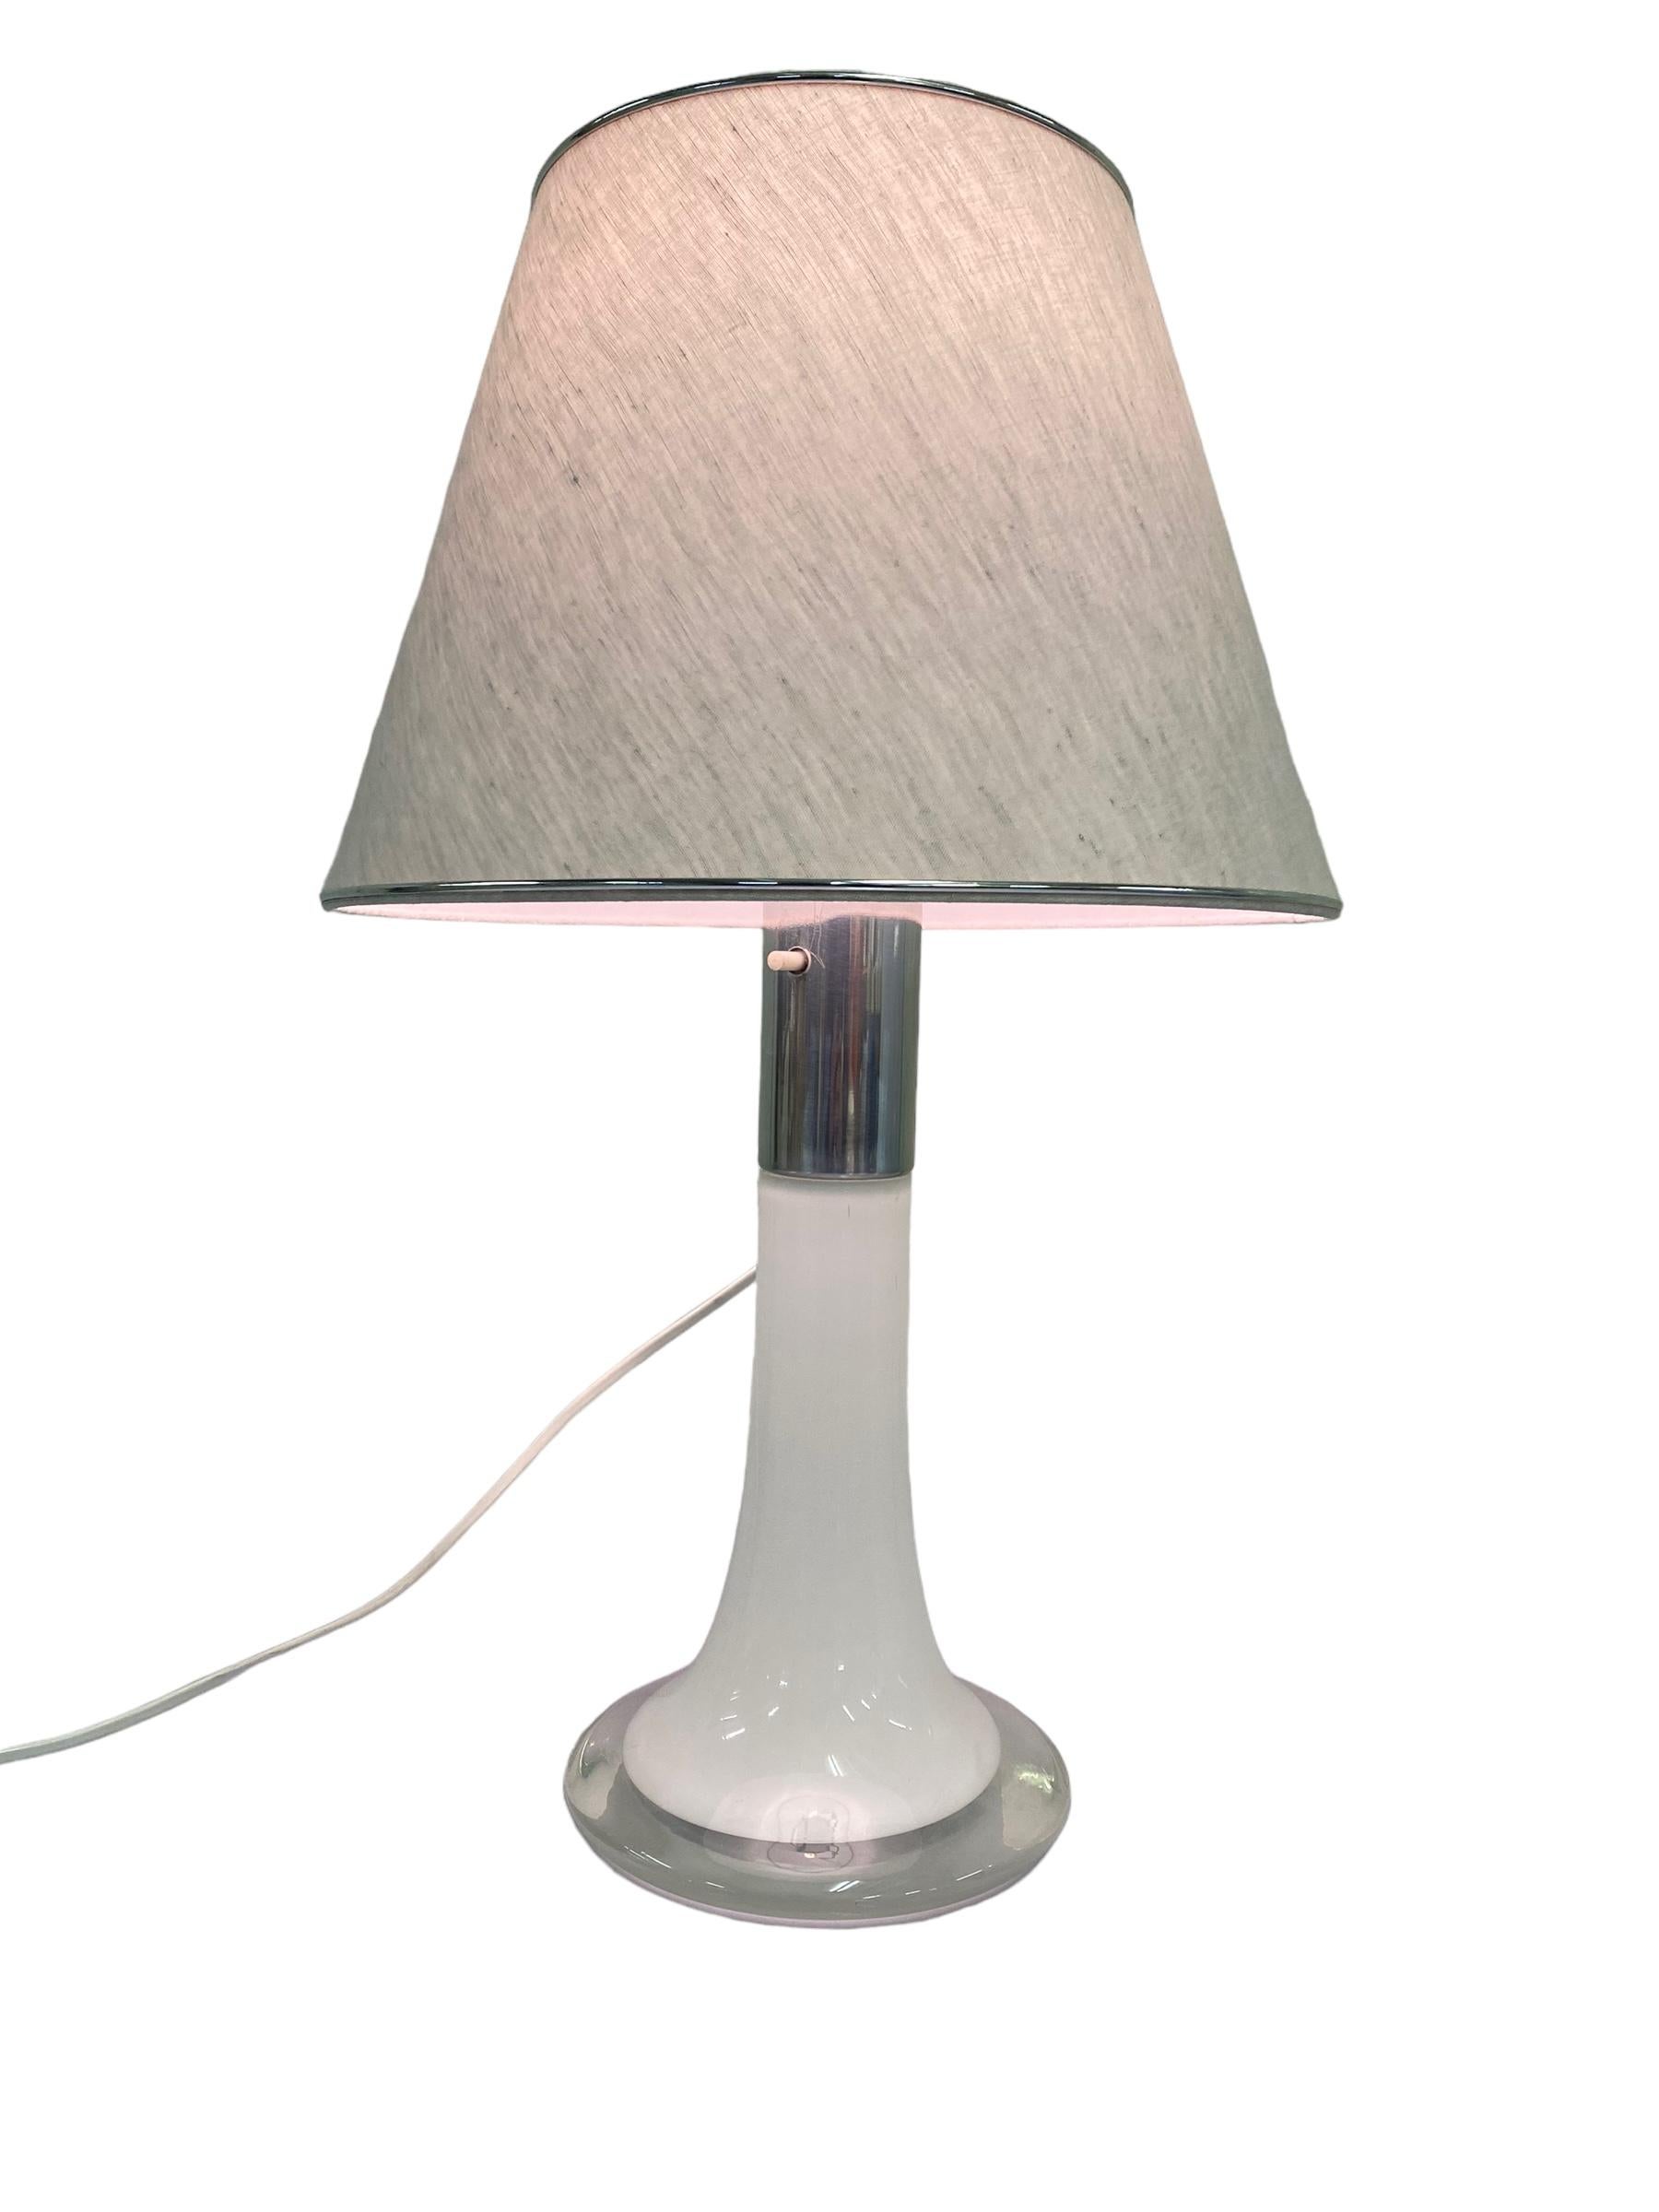 Table lamp model 46-017 in chrome and opaline glass designed by Lisa Johansson-Pape and manufactured by Orno Oy In Finland in the 1960s. This simple yet elegant design is one of the most well known designs from the renowned Lisa Johansson-Pape. A